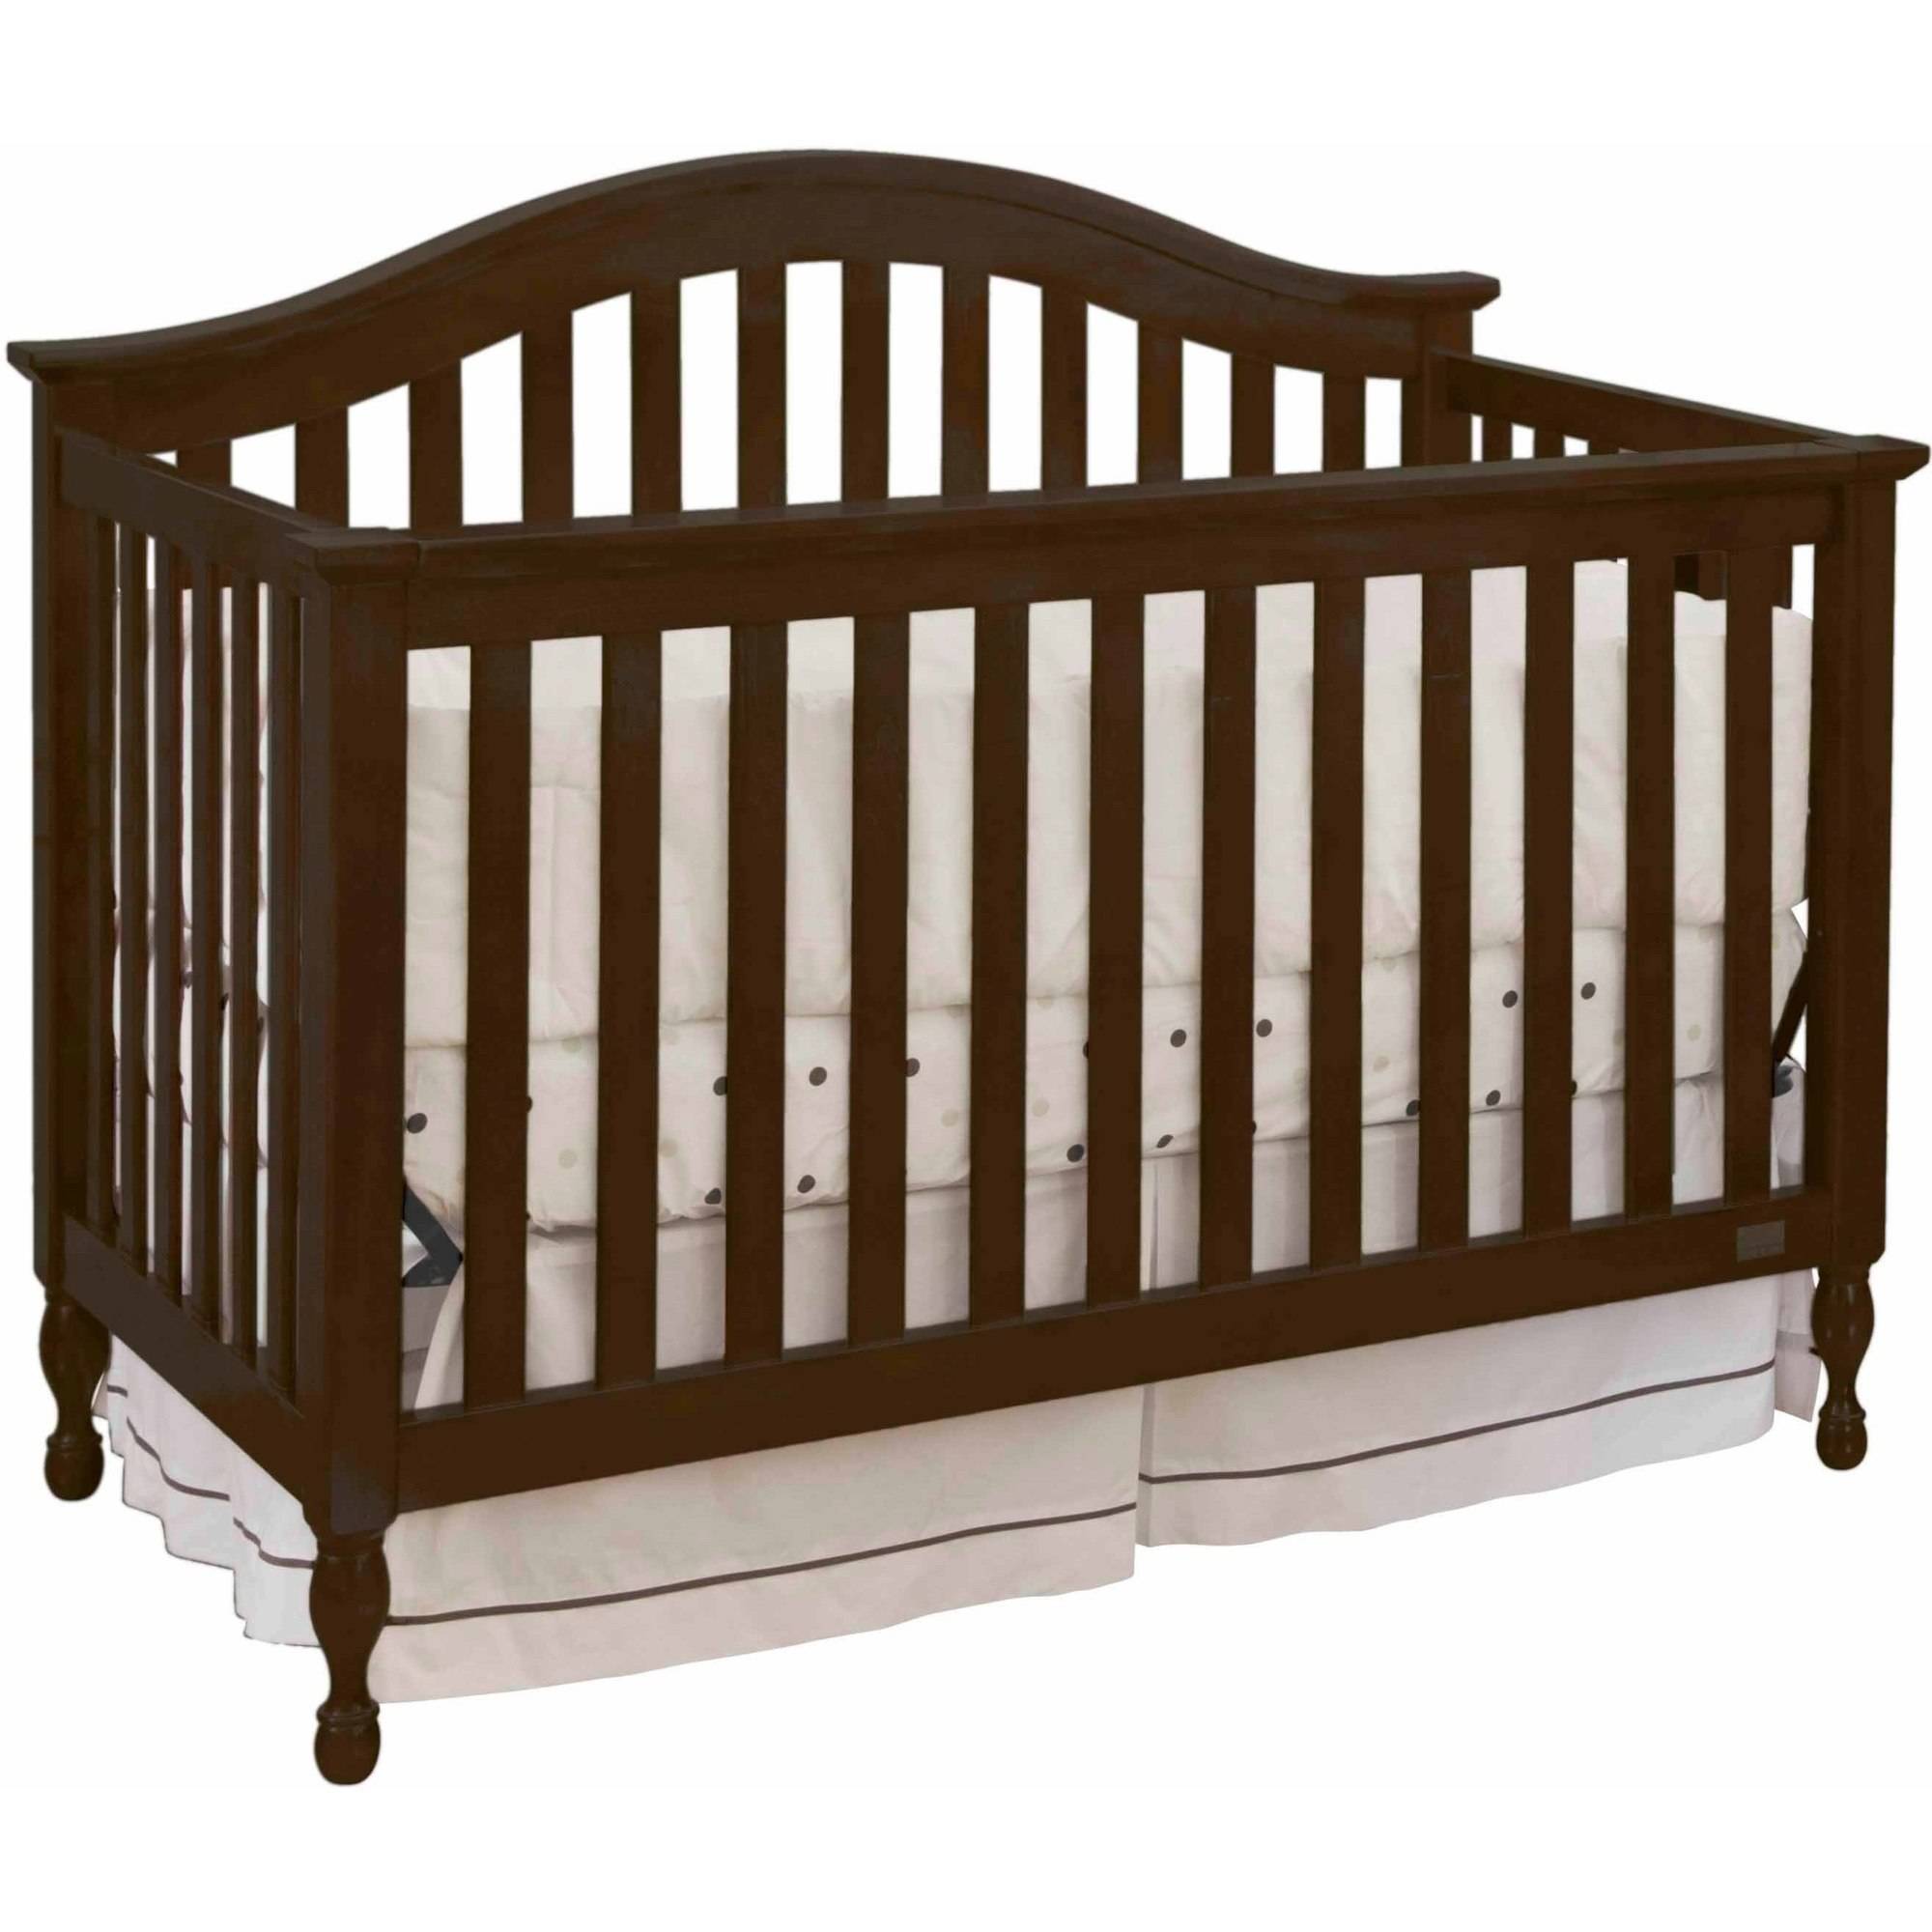 Lolly & Me Bailey 4-in-1 Convertible Crib Acorn - image 2 of 2